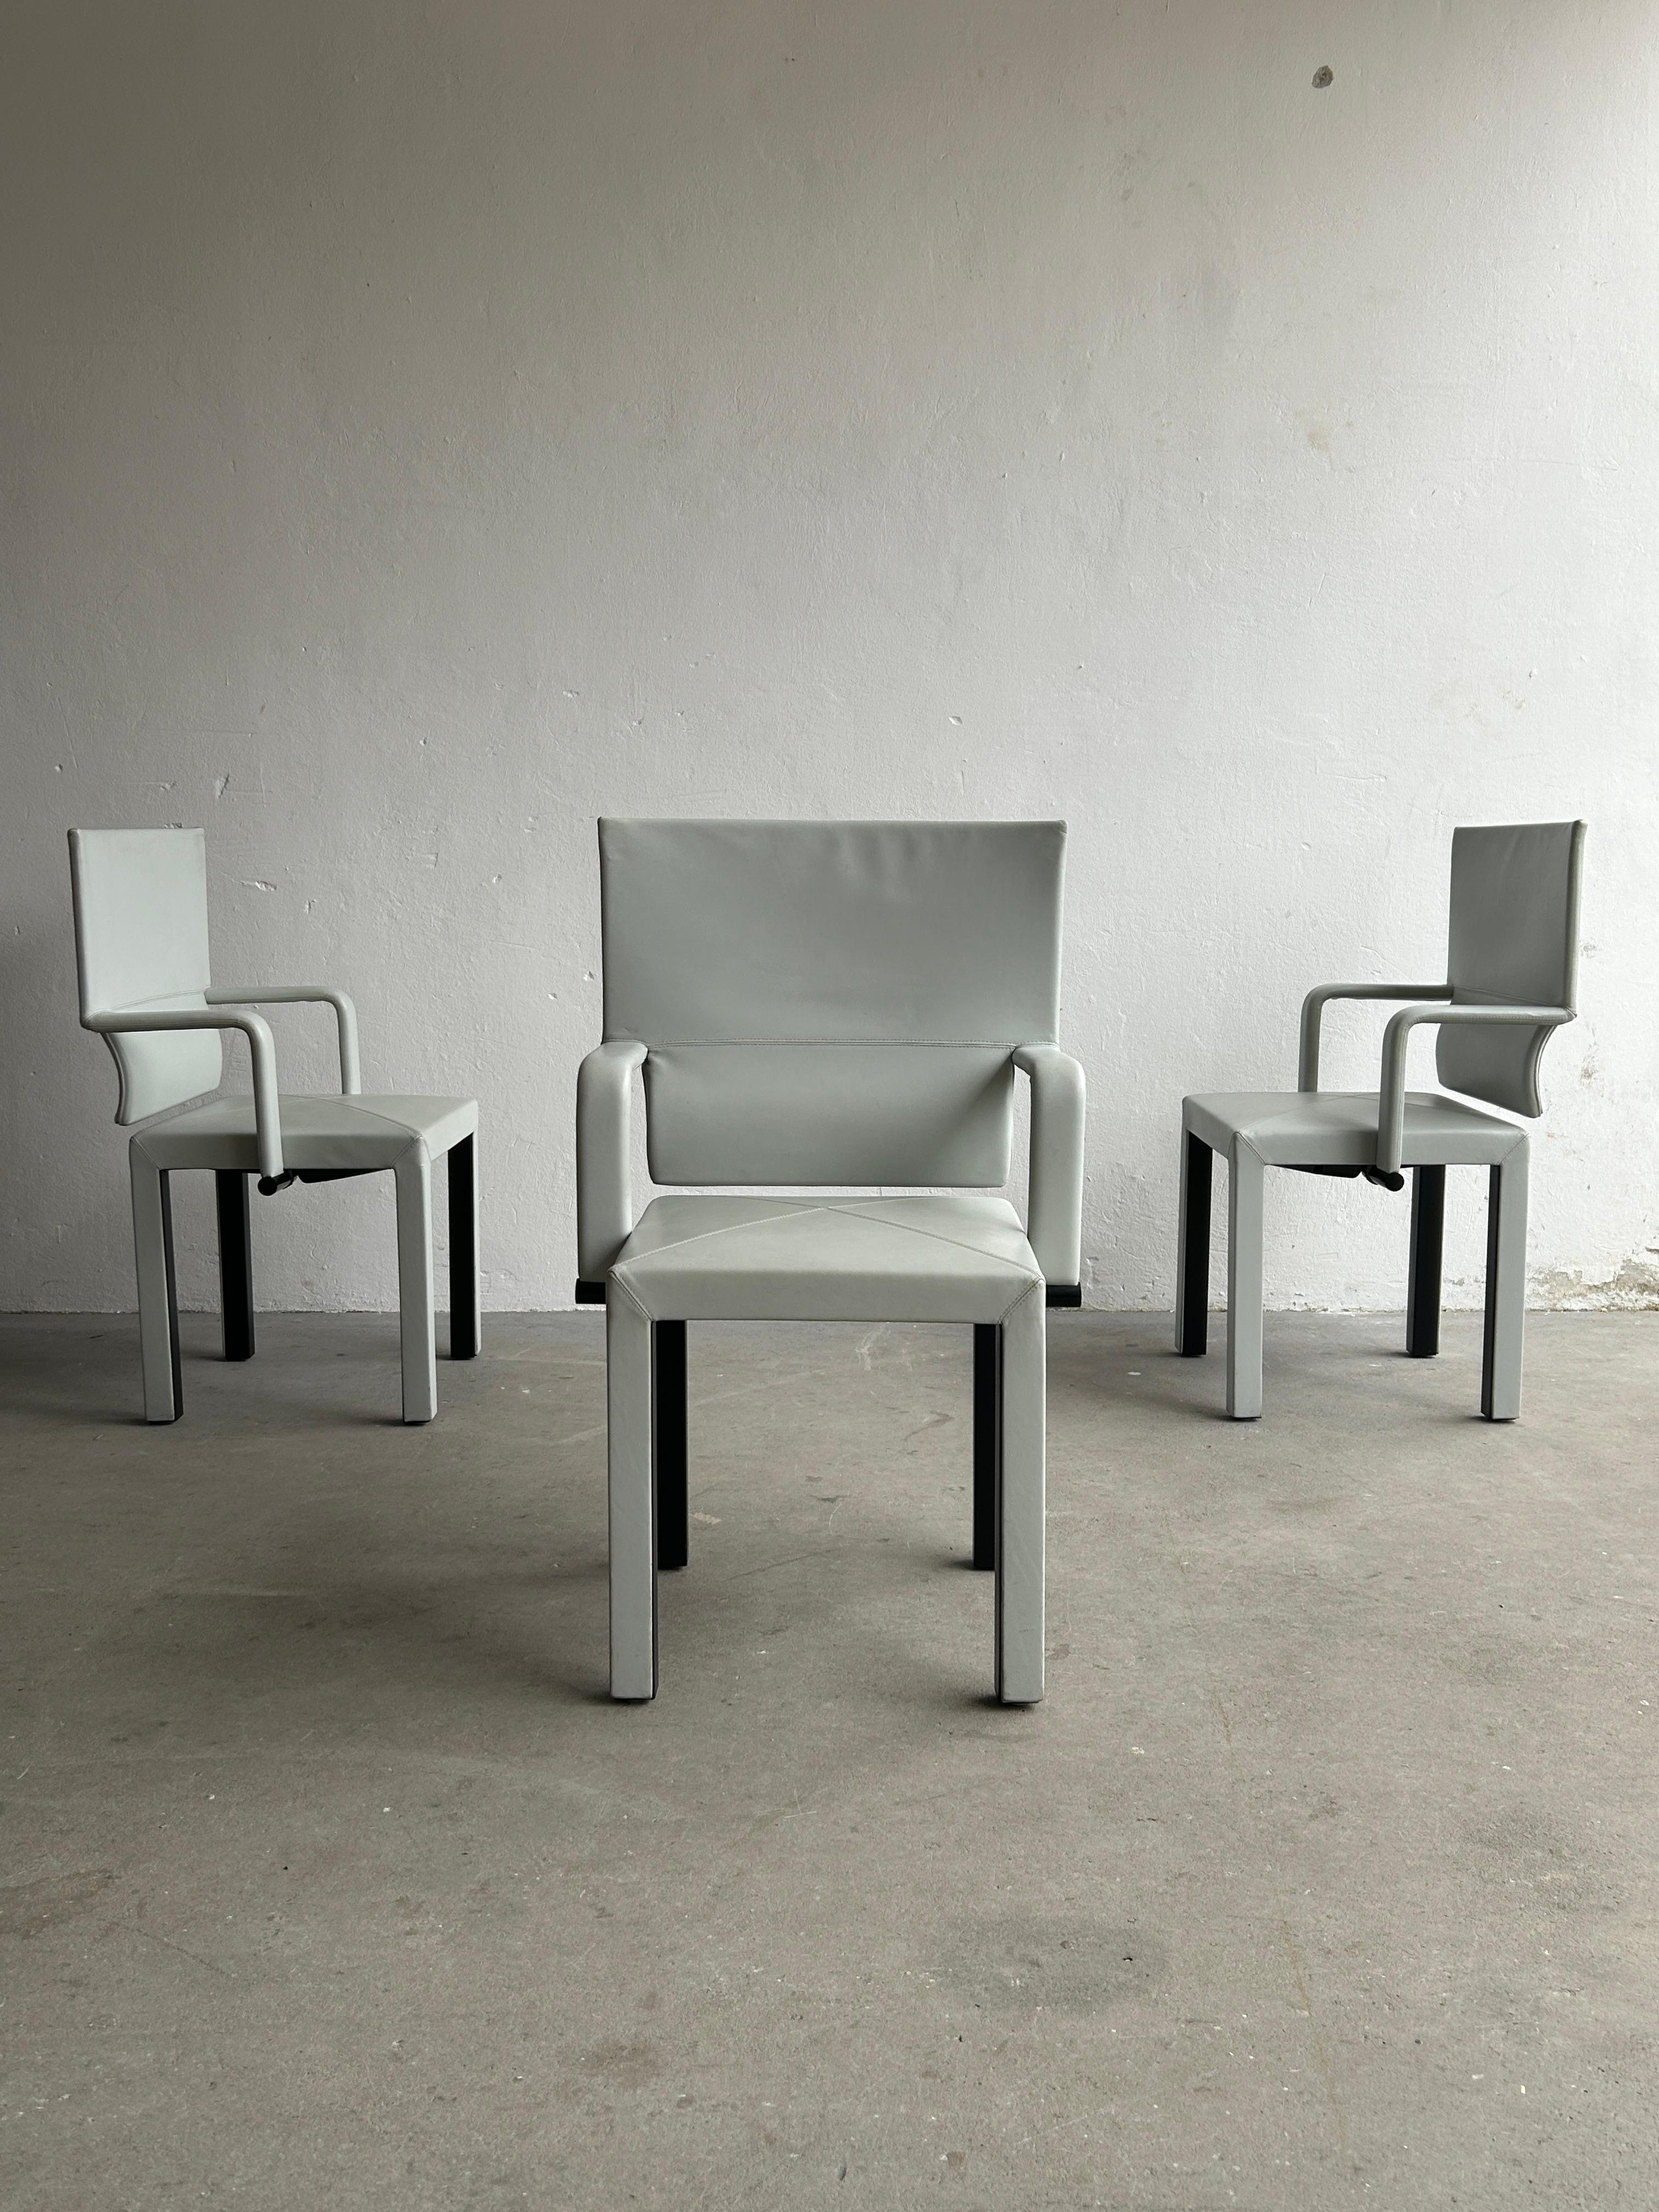 Three amazing 'Arcona' vintage leather armchairs from the Arcadia series by Paolo Piva for B&B Italia. Produced by B&B Italia in Italy during the 1990s. Sculptural, geometrically shaped postmodern structure. In light grey leather edition.

Quality